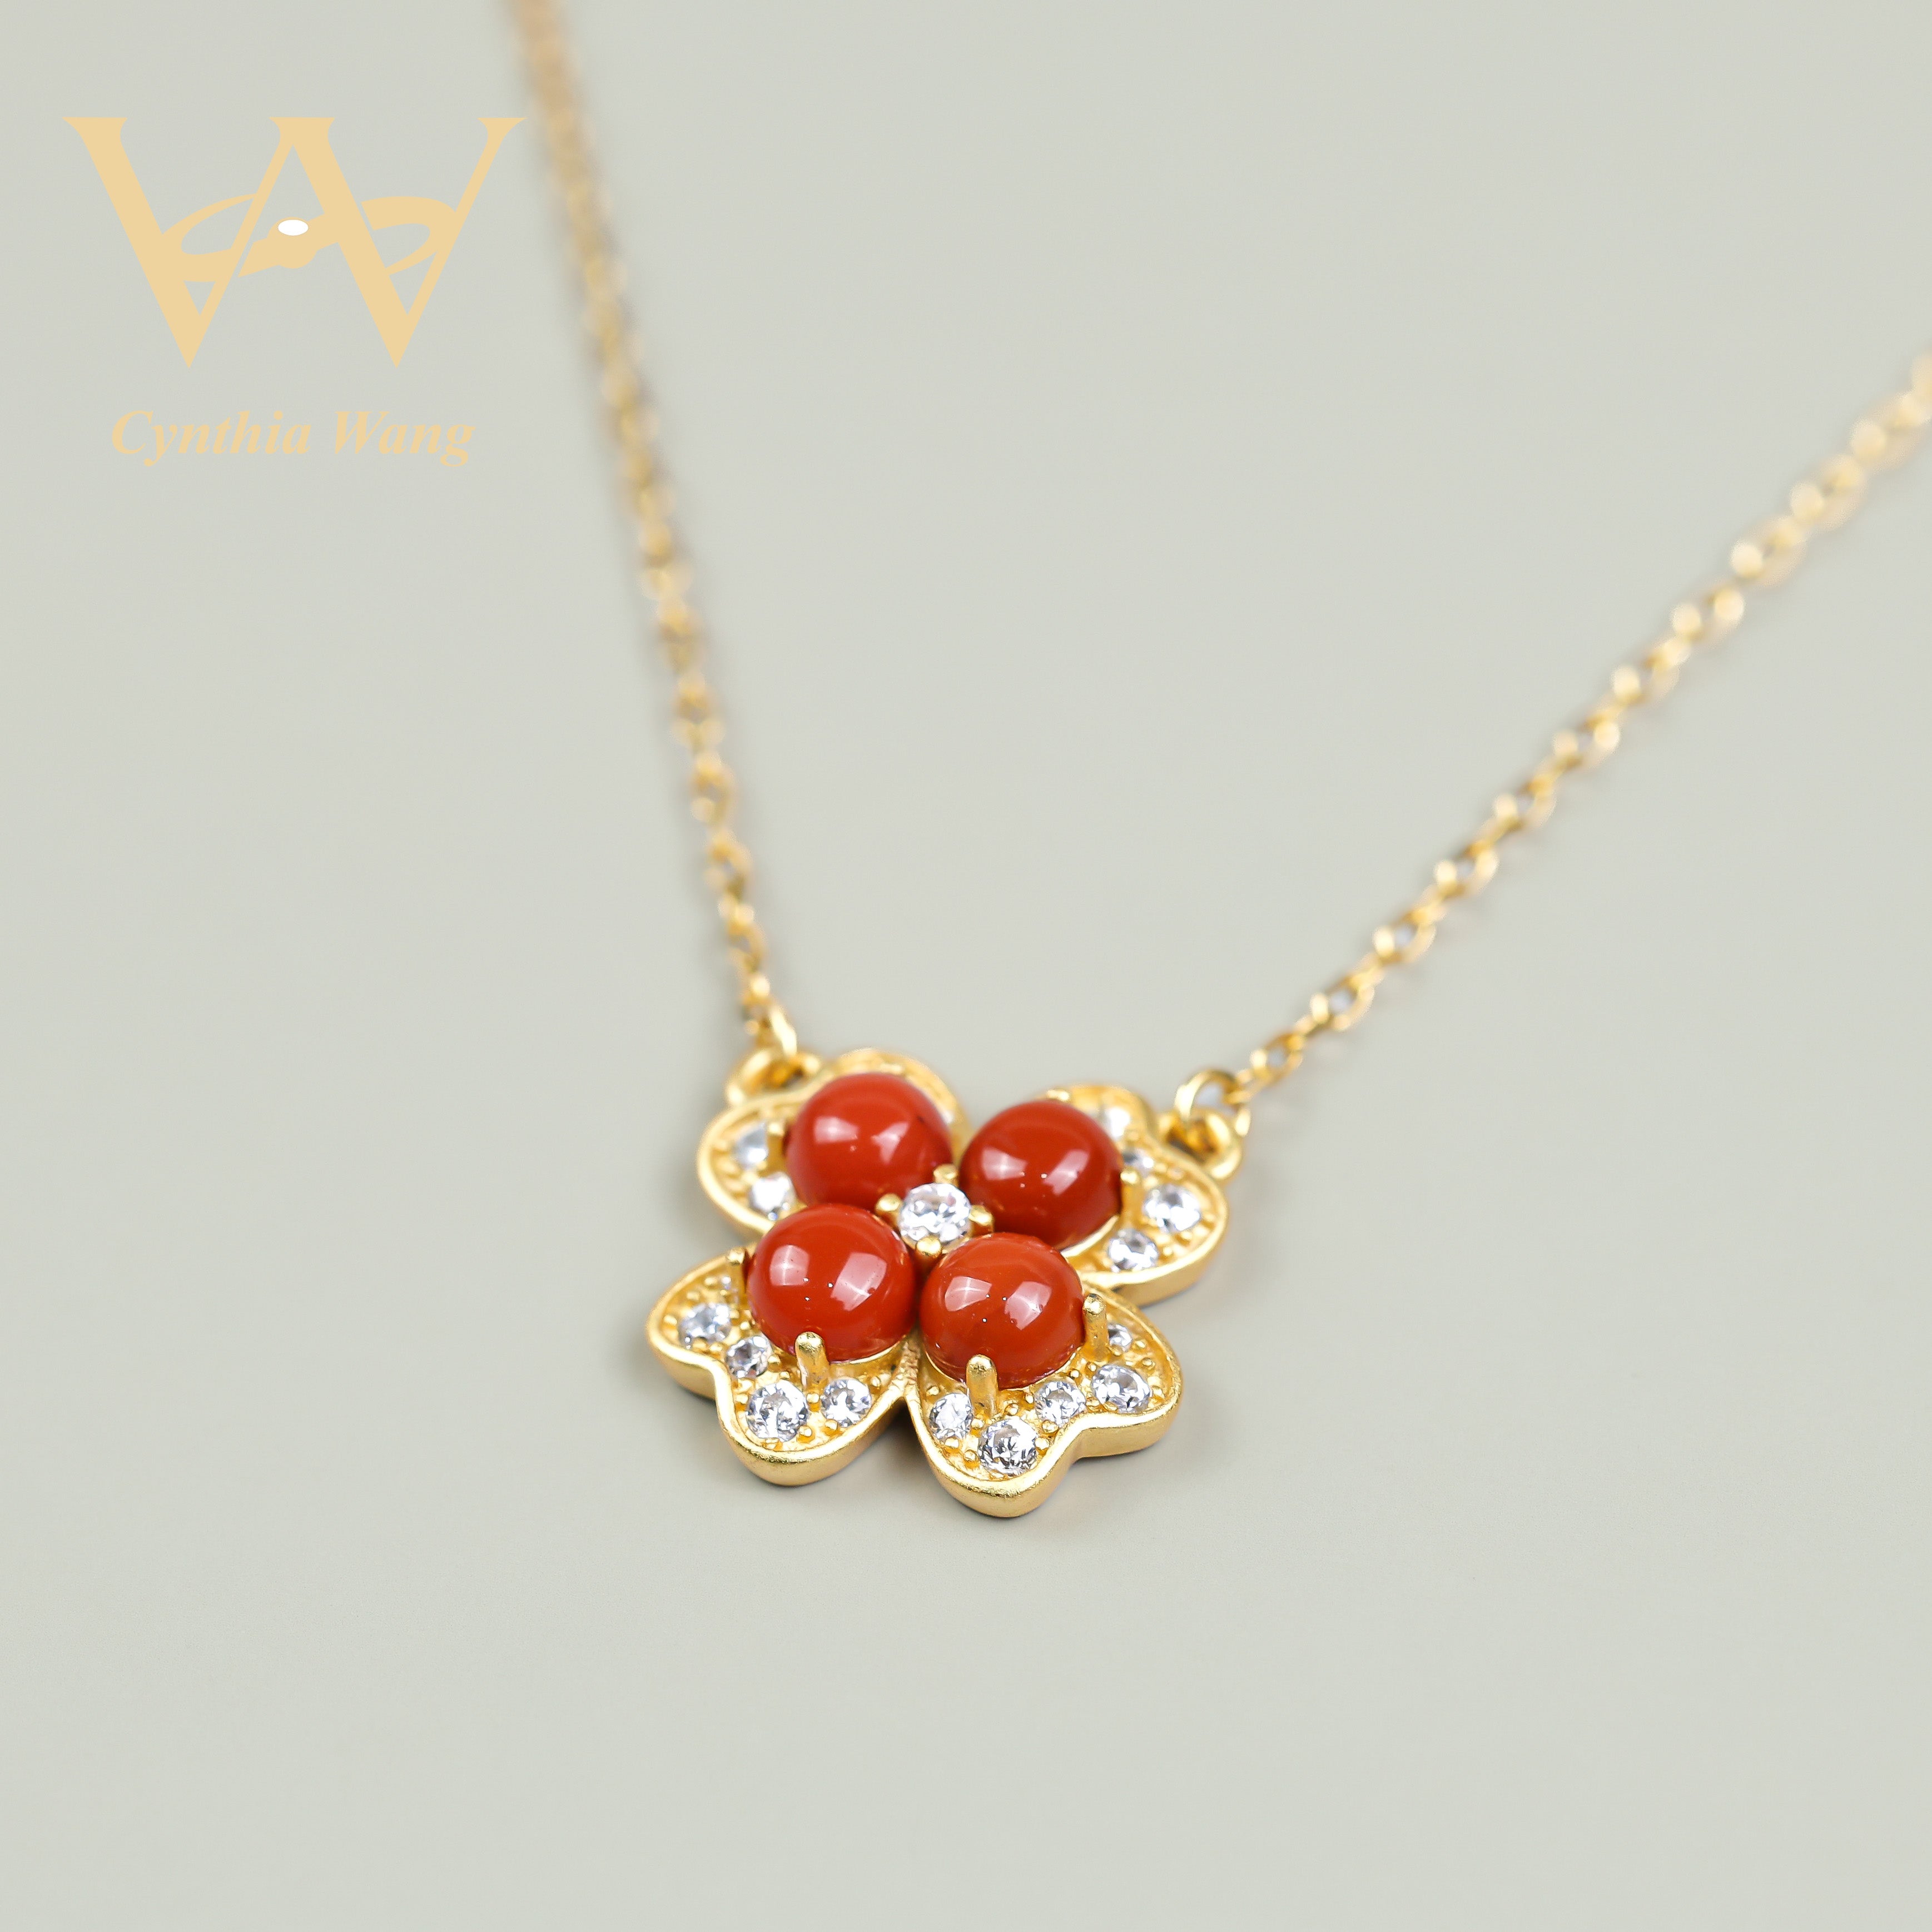 'Glowing Clover' Red Carnelian Necklace